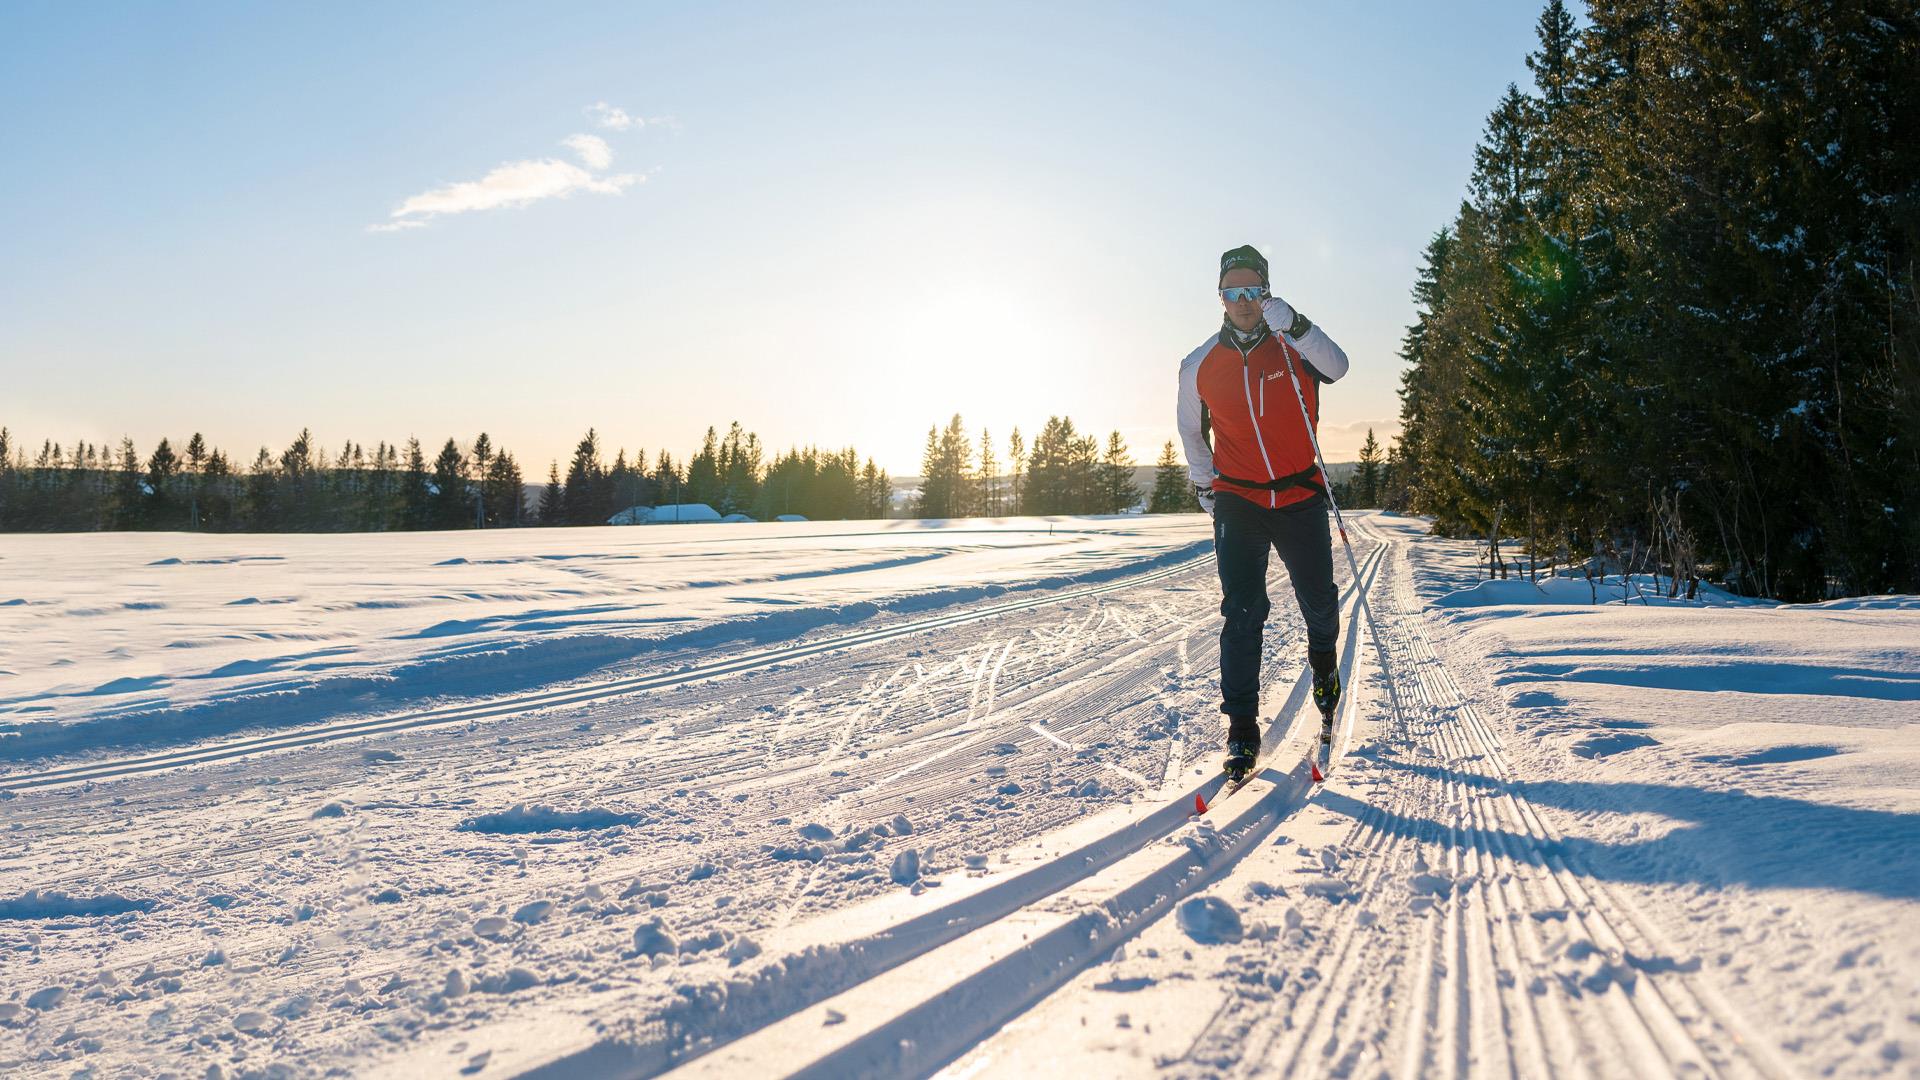 Cross country skiing in the winter sun